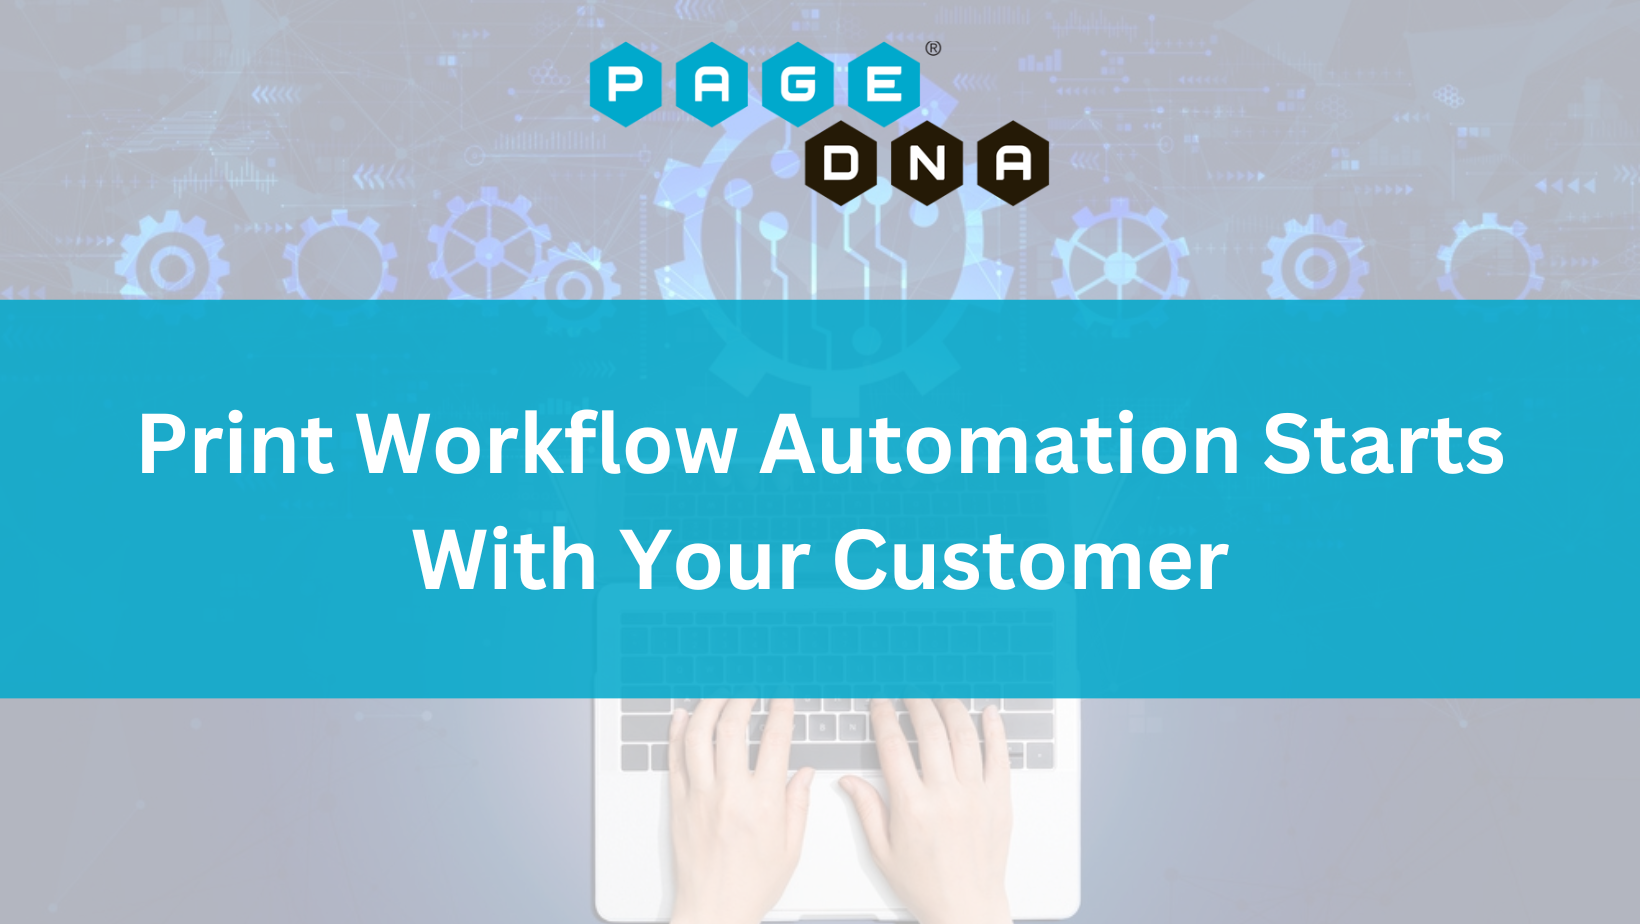 Print Workflow Automation Starts With Your Customer